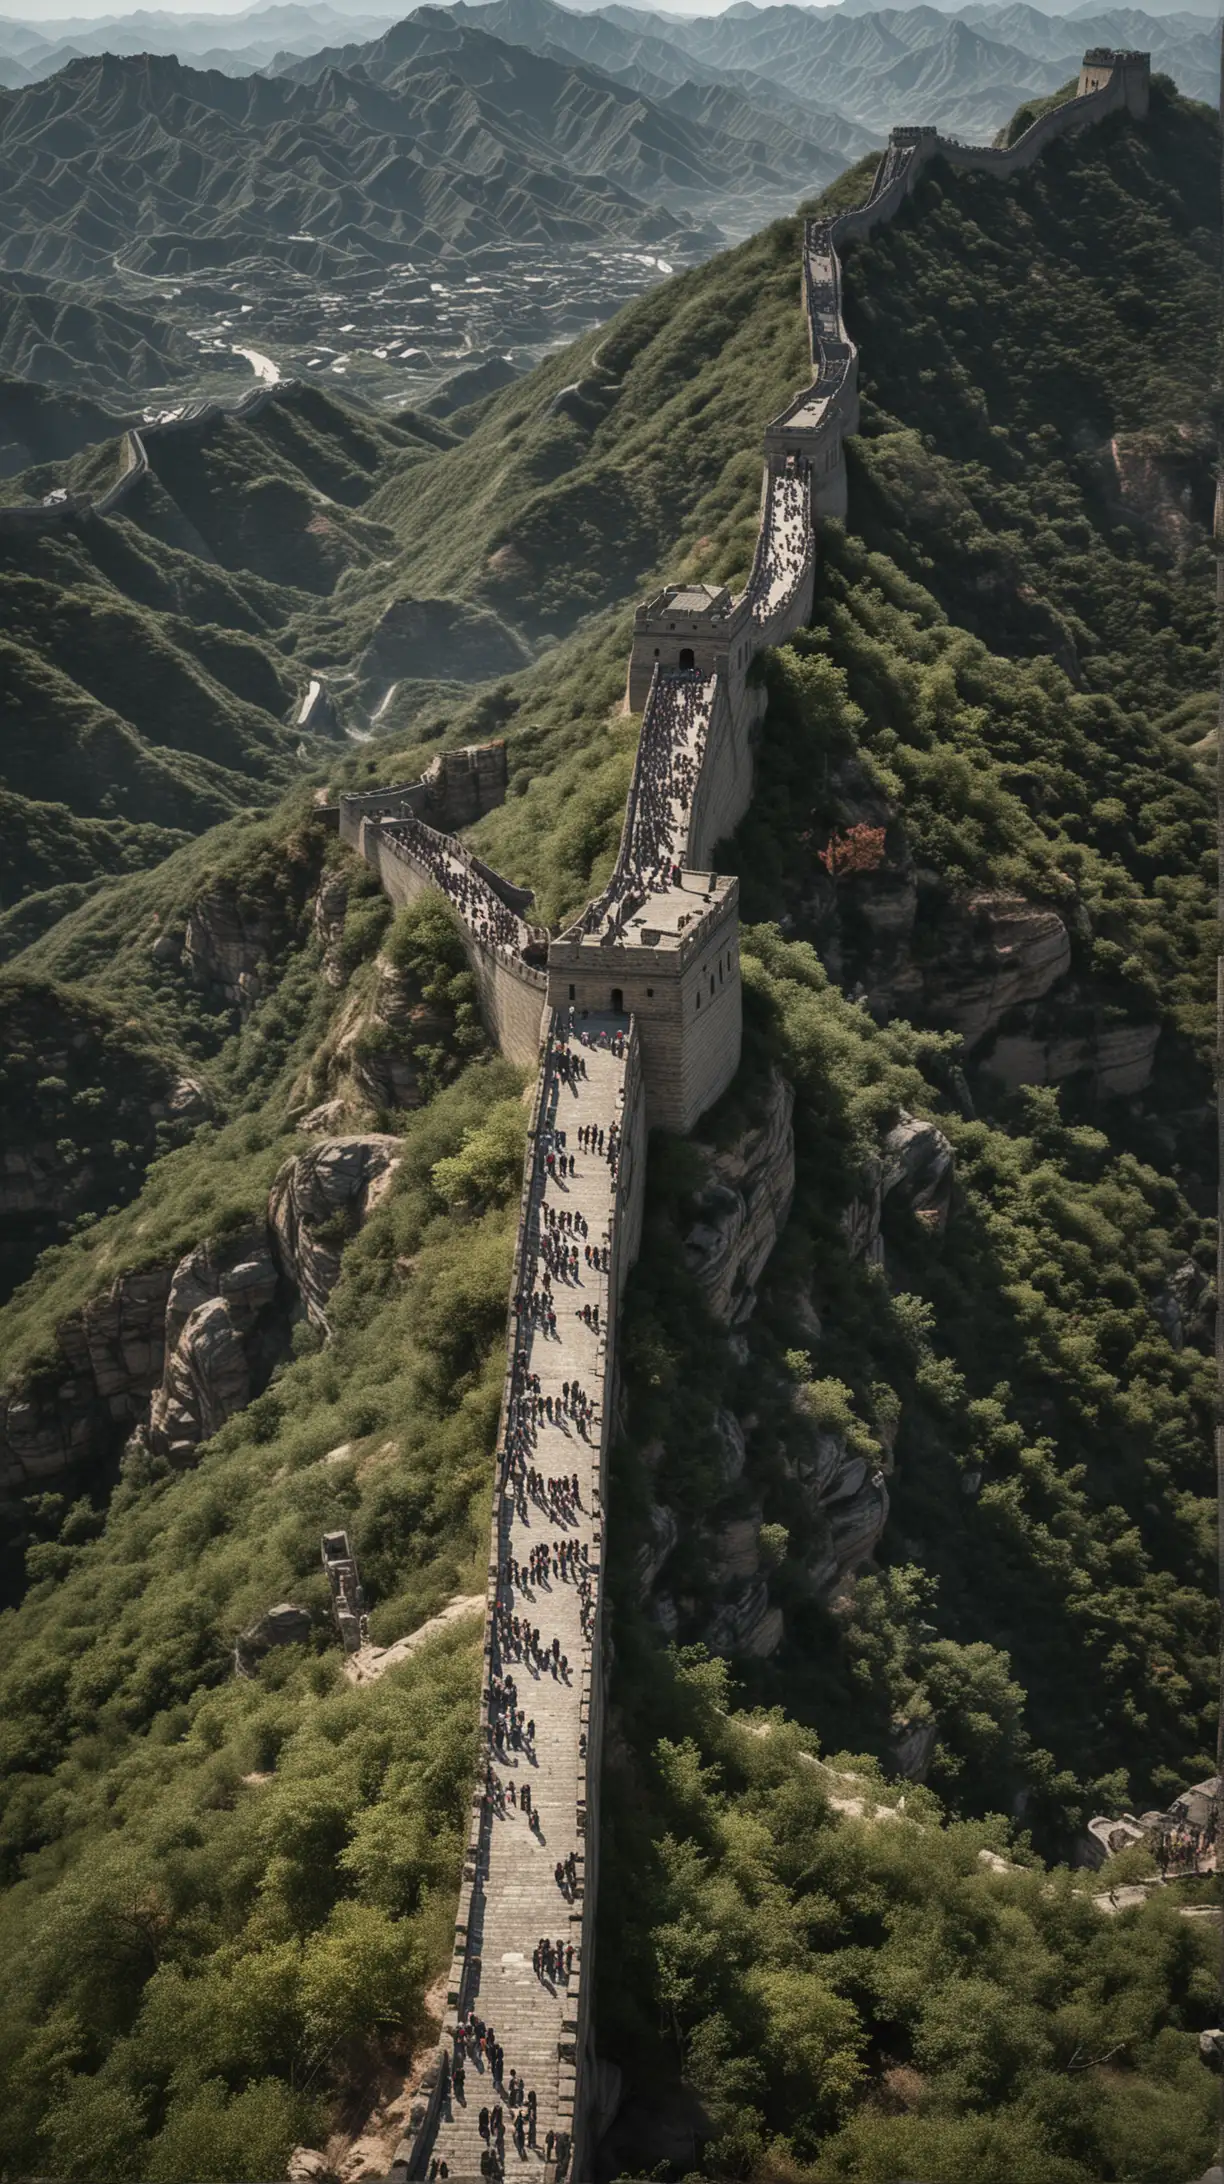 Overview of the Great Wall: Capture an expansive aerial view or panoramic shot showcasing a significant portion of the Great Wall, illustrating its vastness and strategic placement along rugged landscapes. Hyper realistic